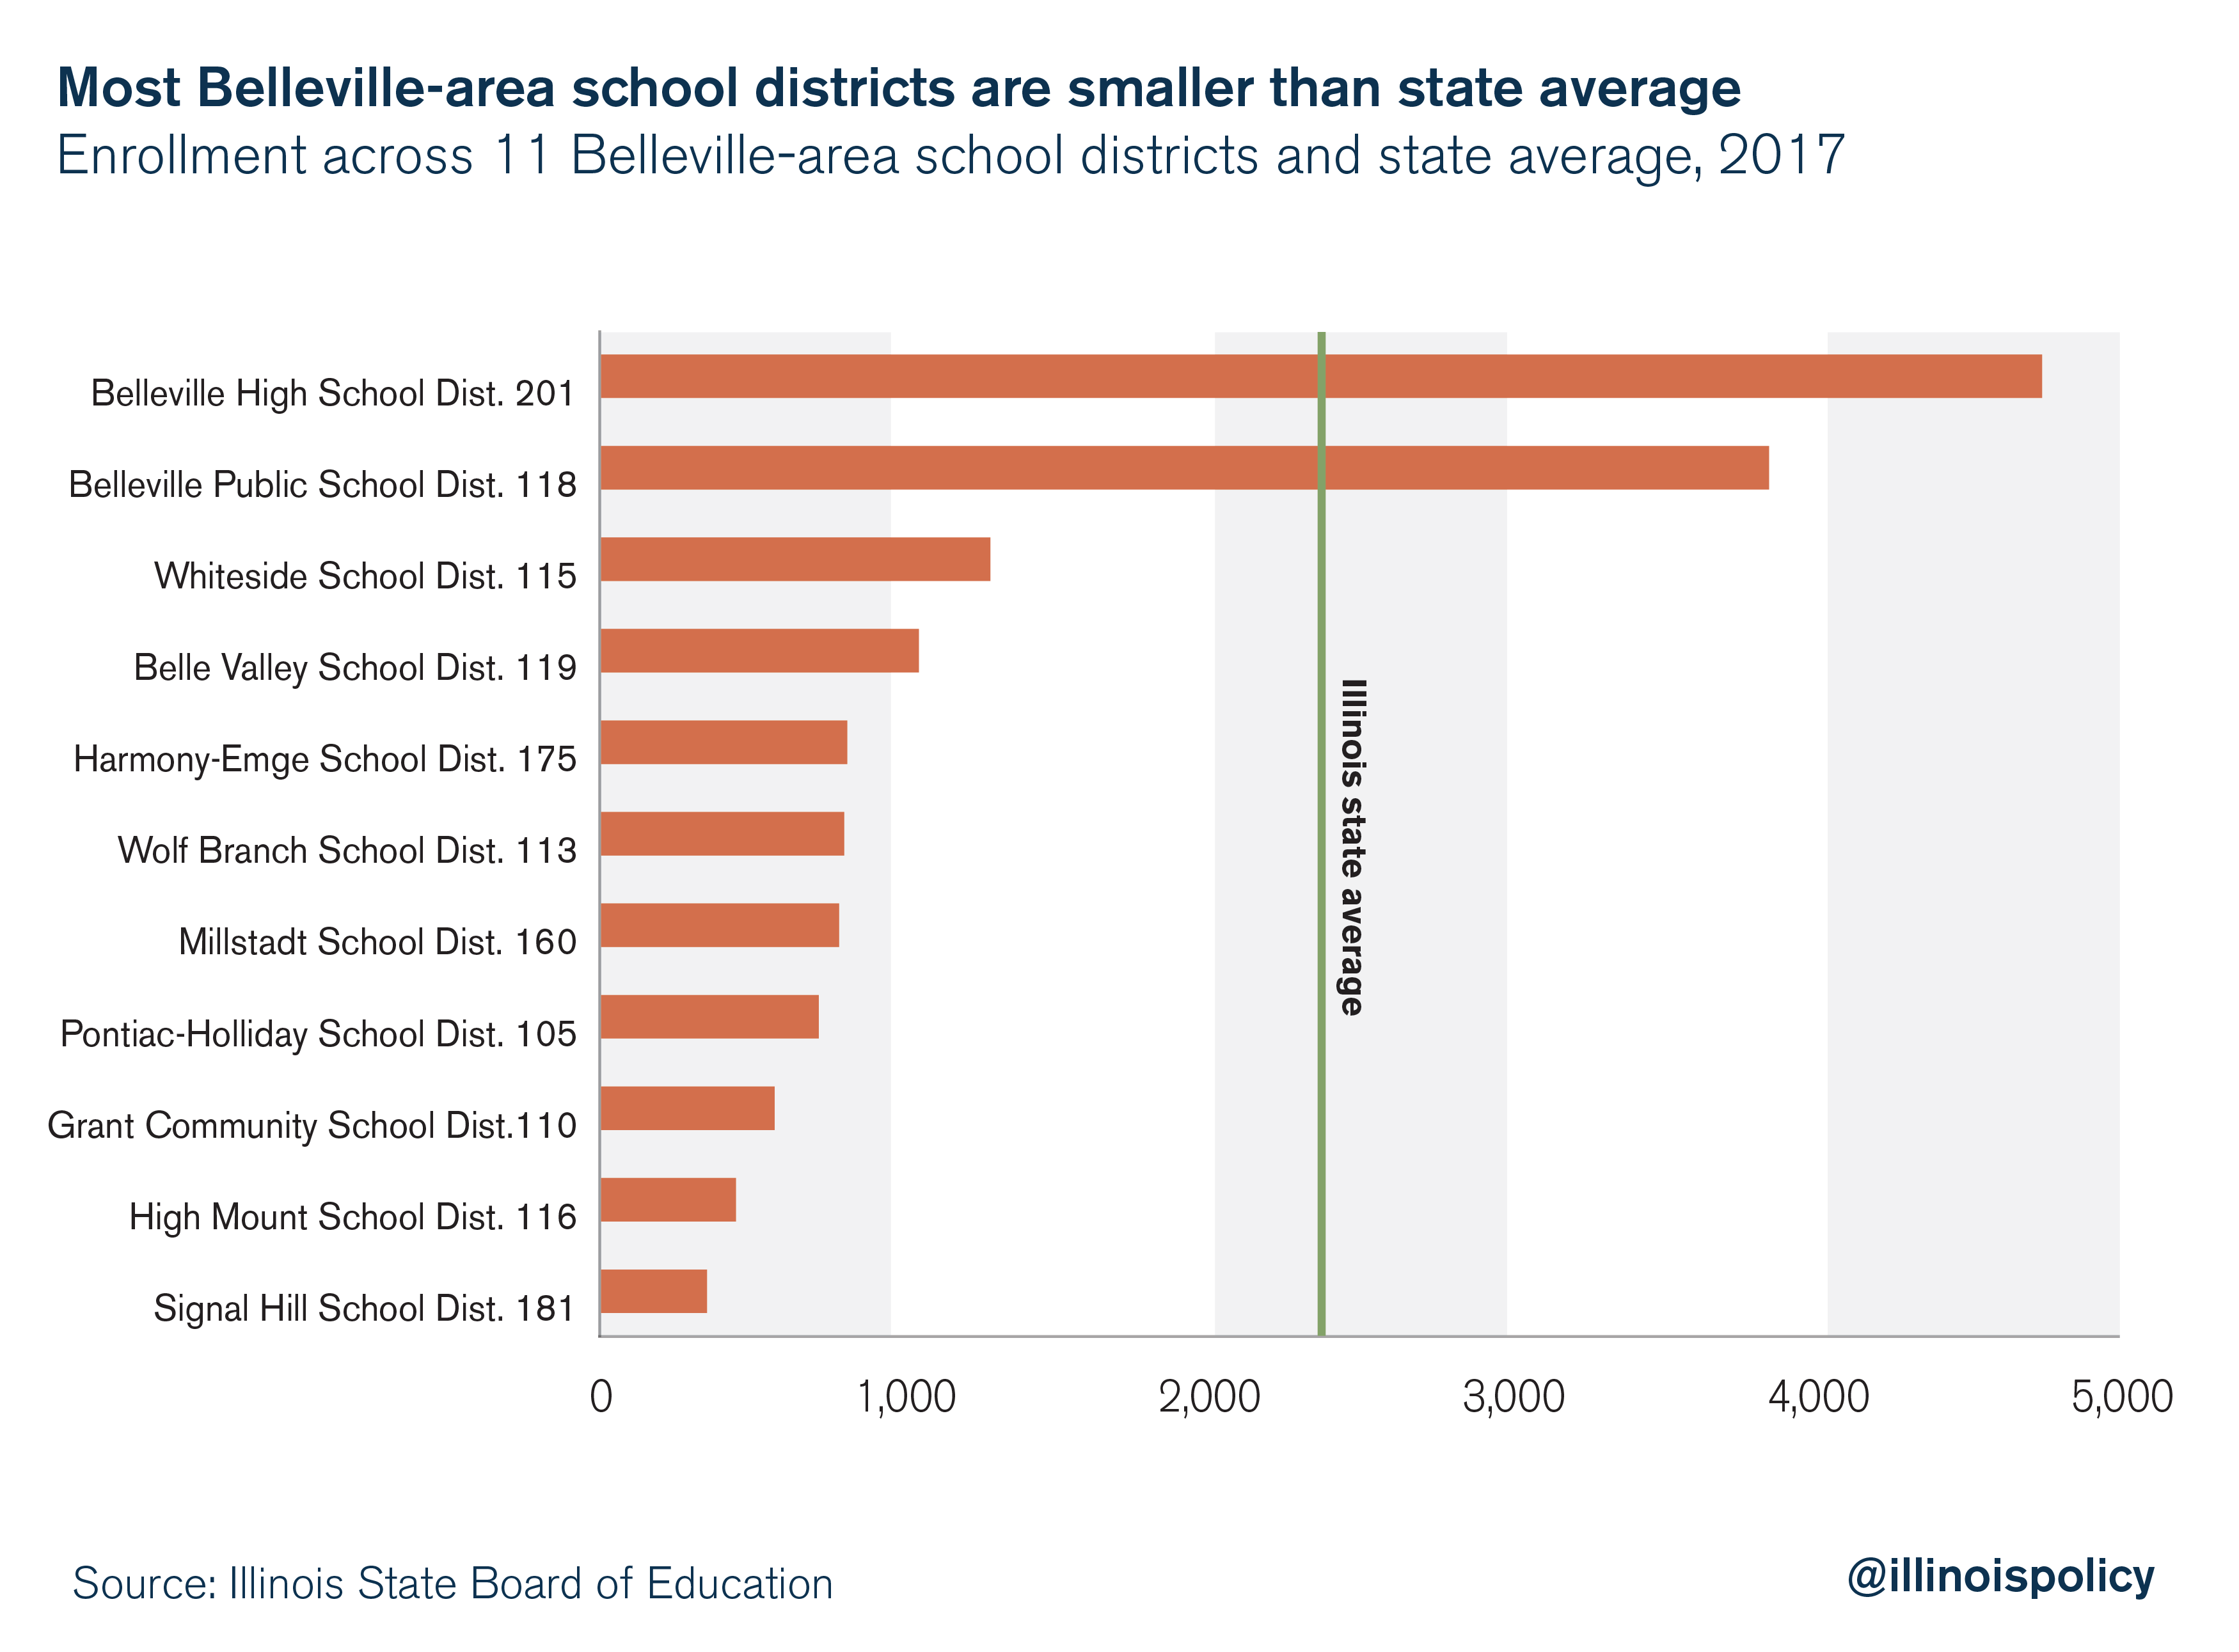 Most Belleville-area school districts are smaller than state average